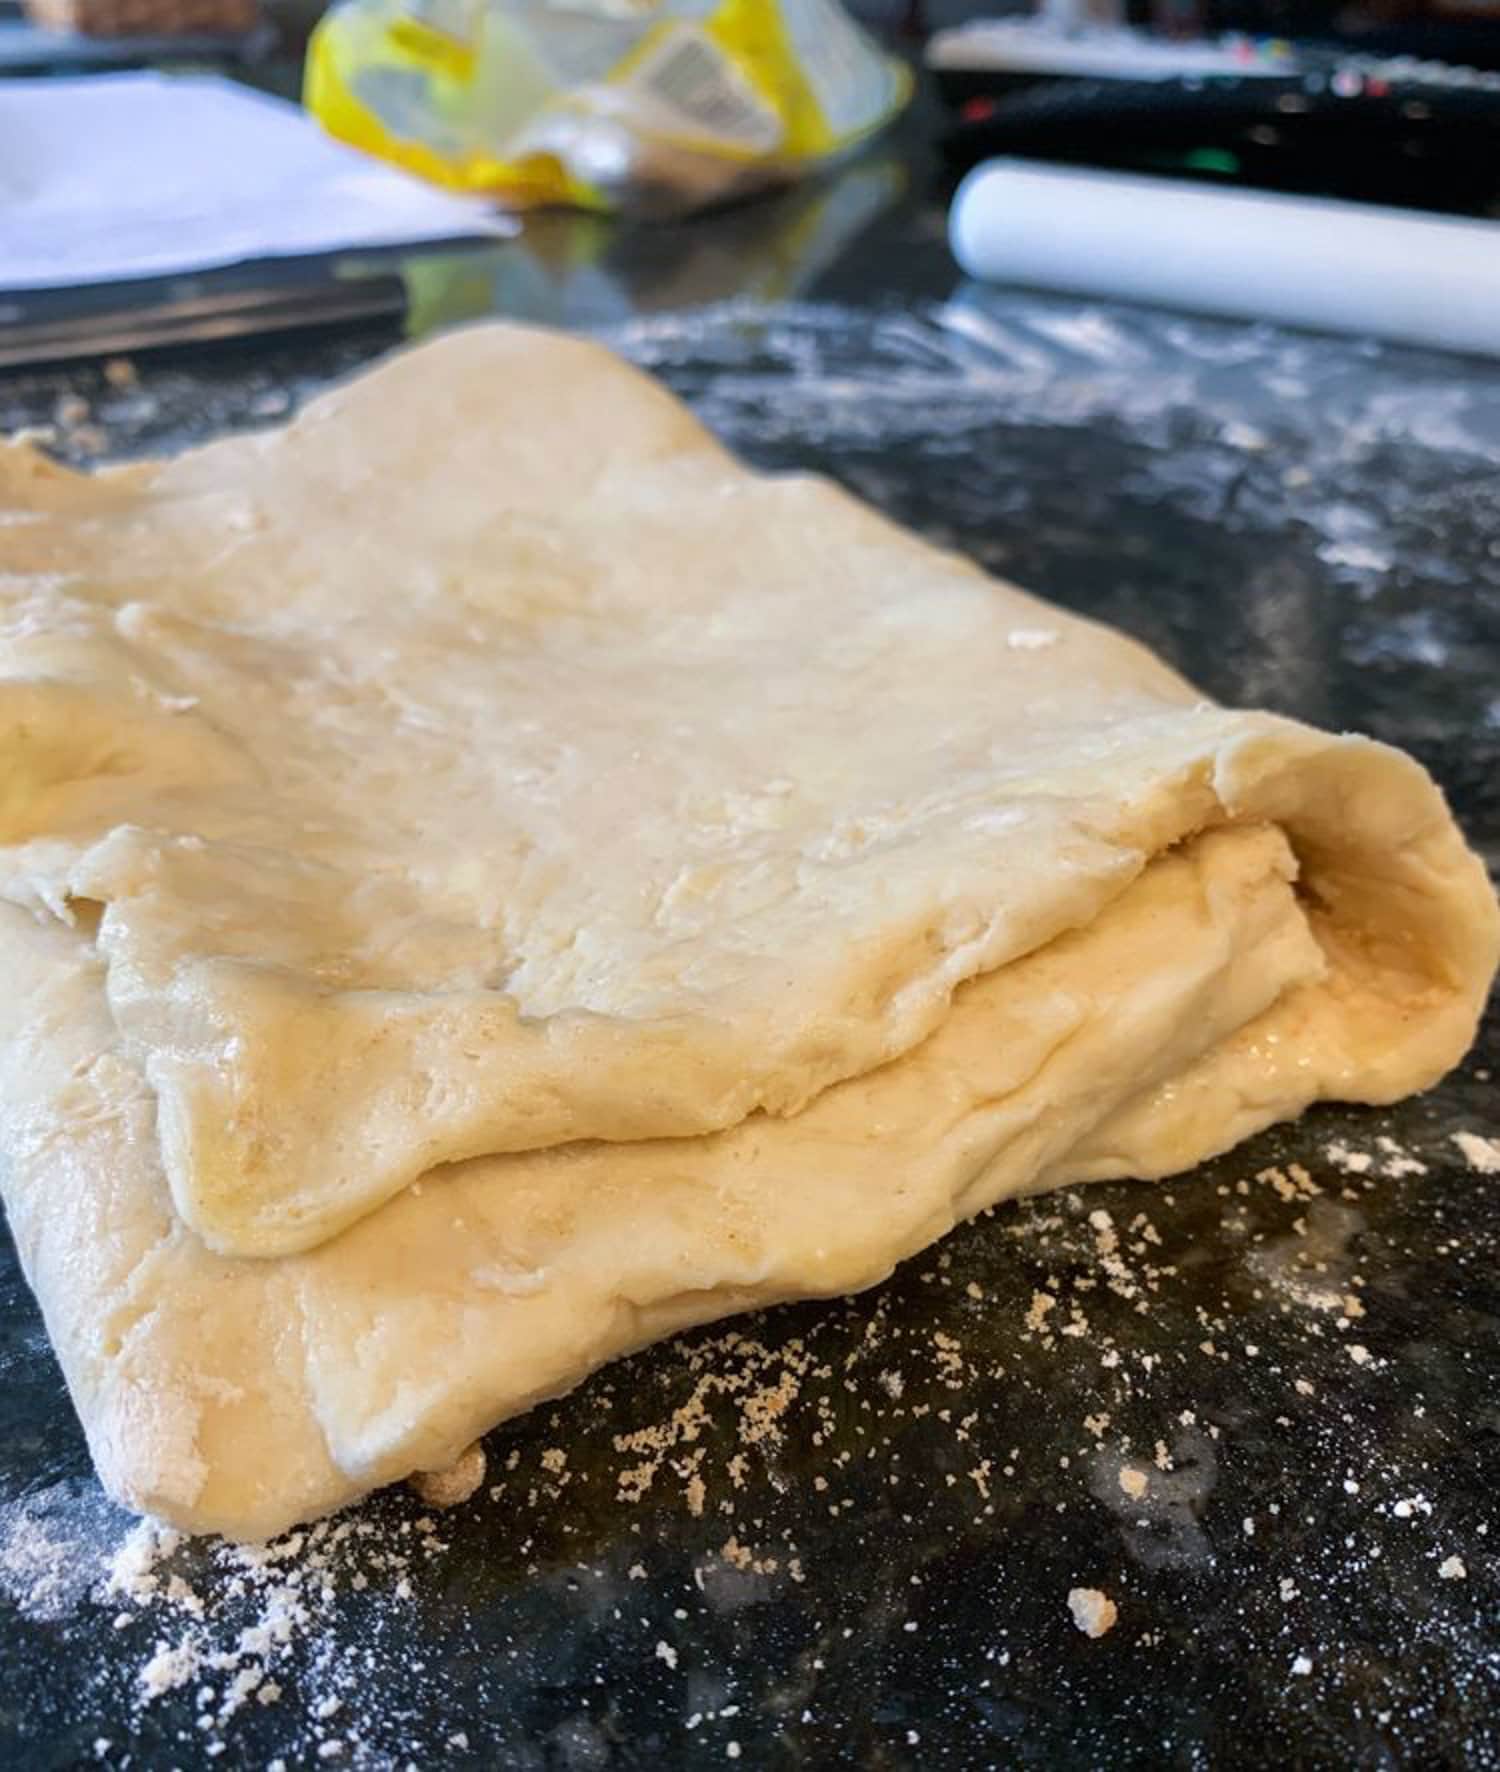 Biscuit dough flattened out on a floured surface